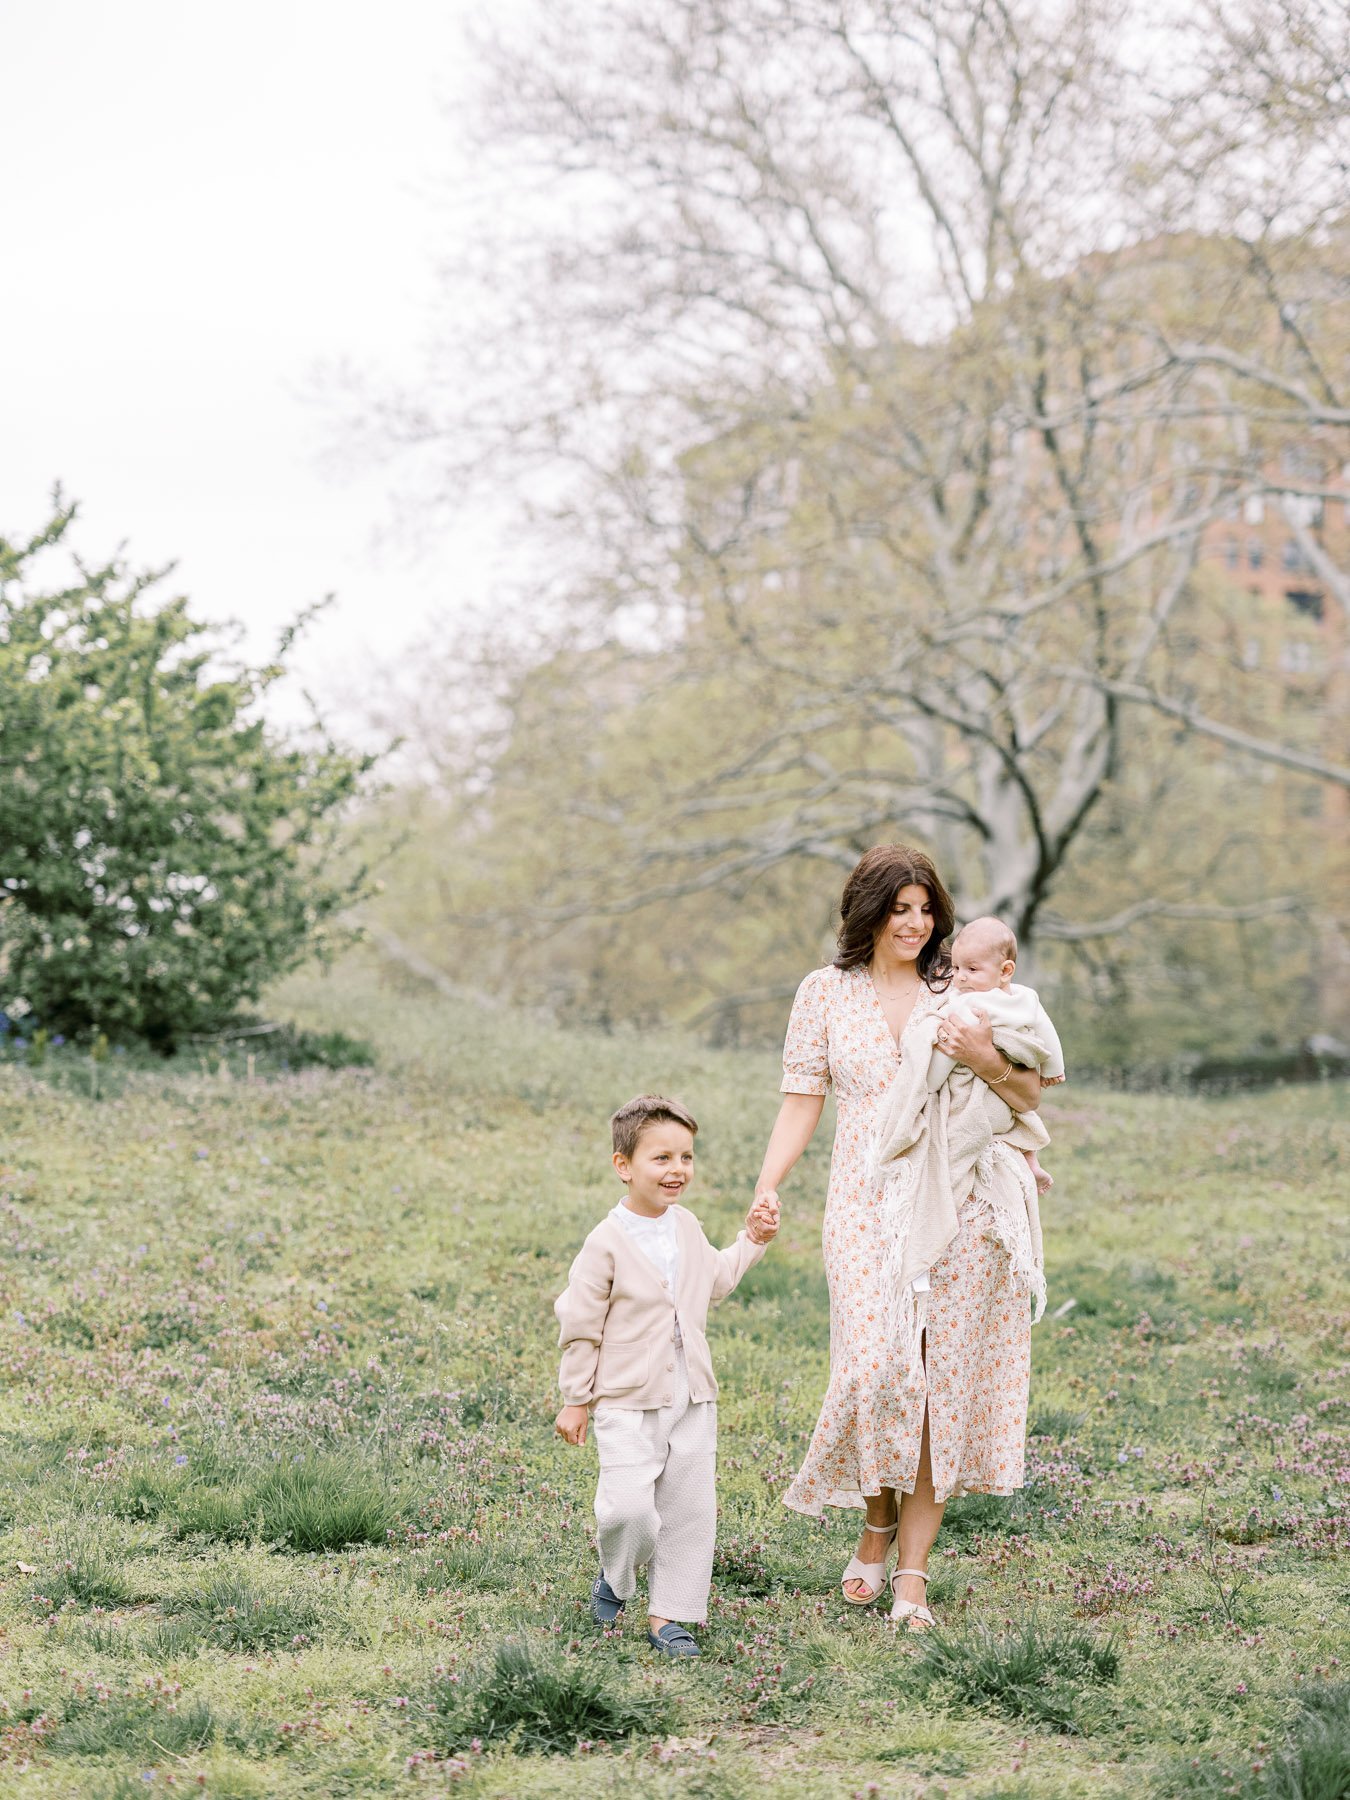 NYC Blossom family portraits by Michelle Lange Photography-24.jpg